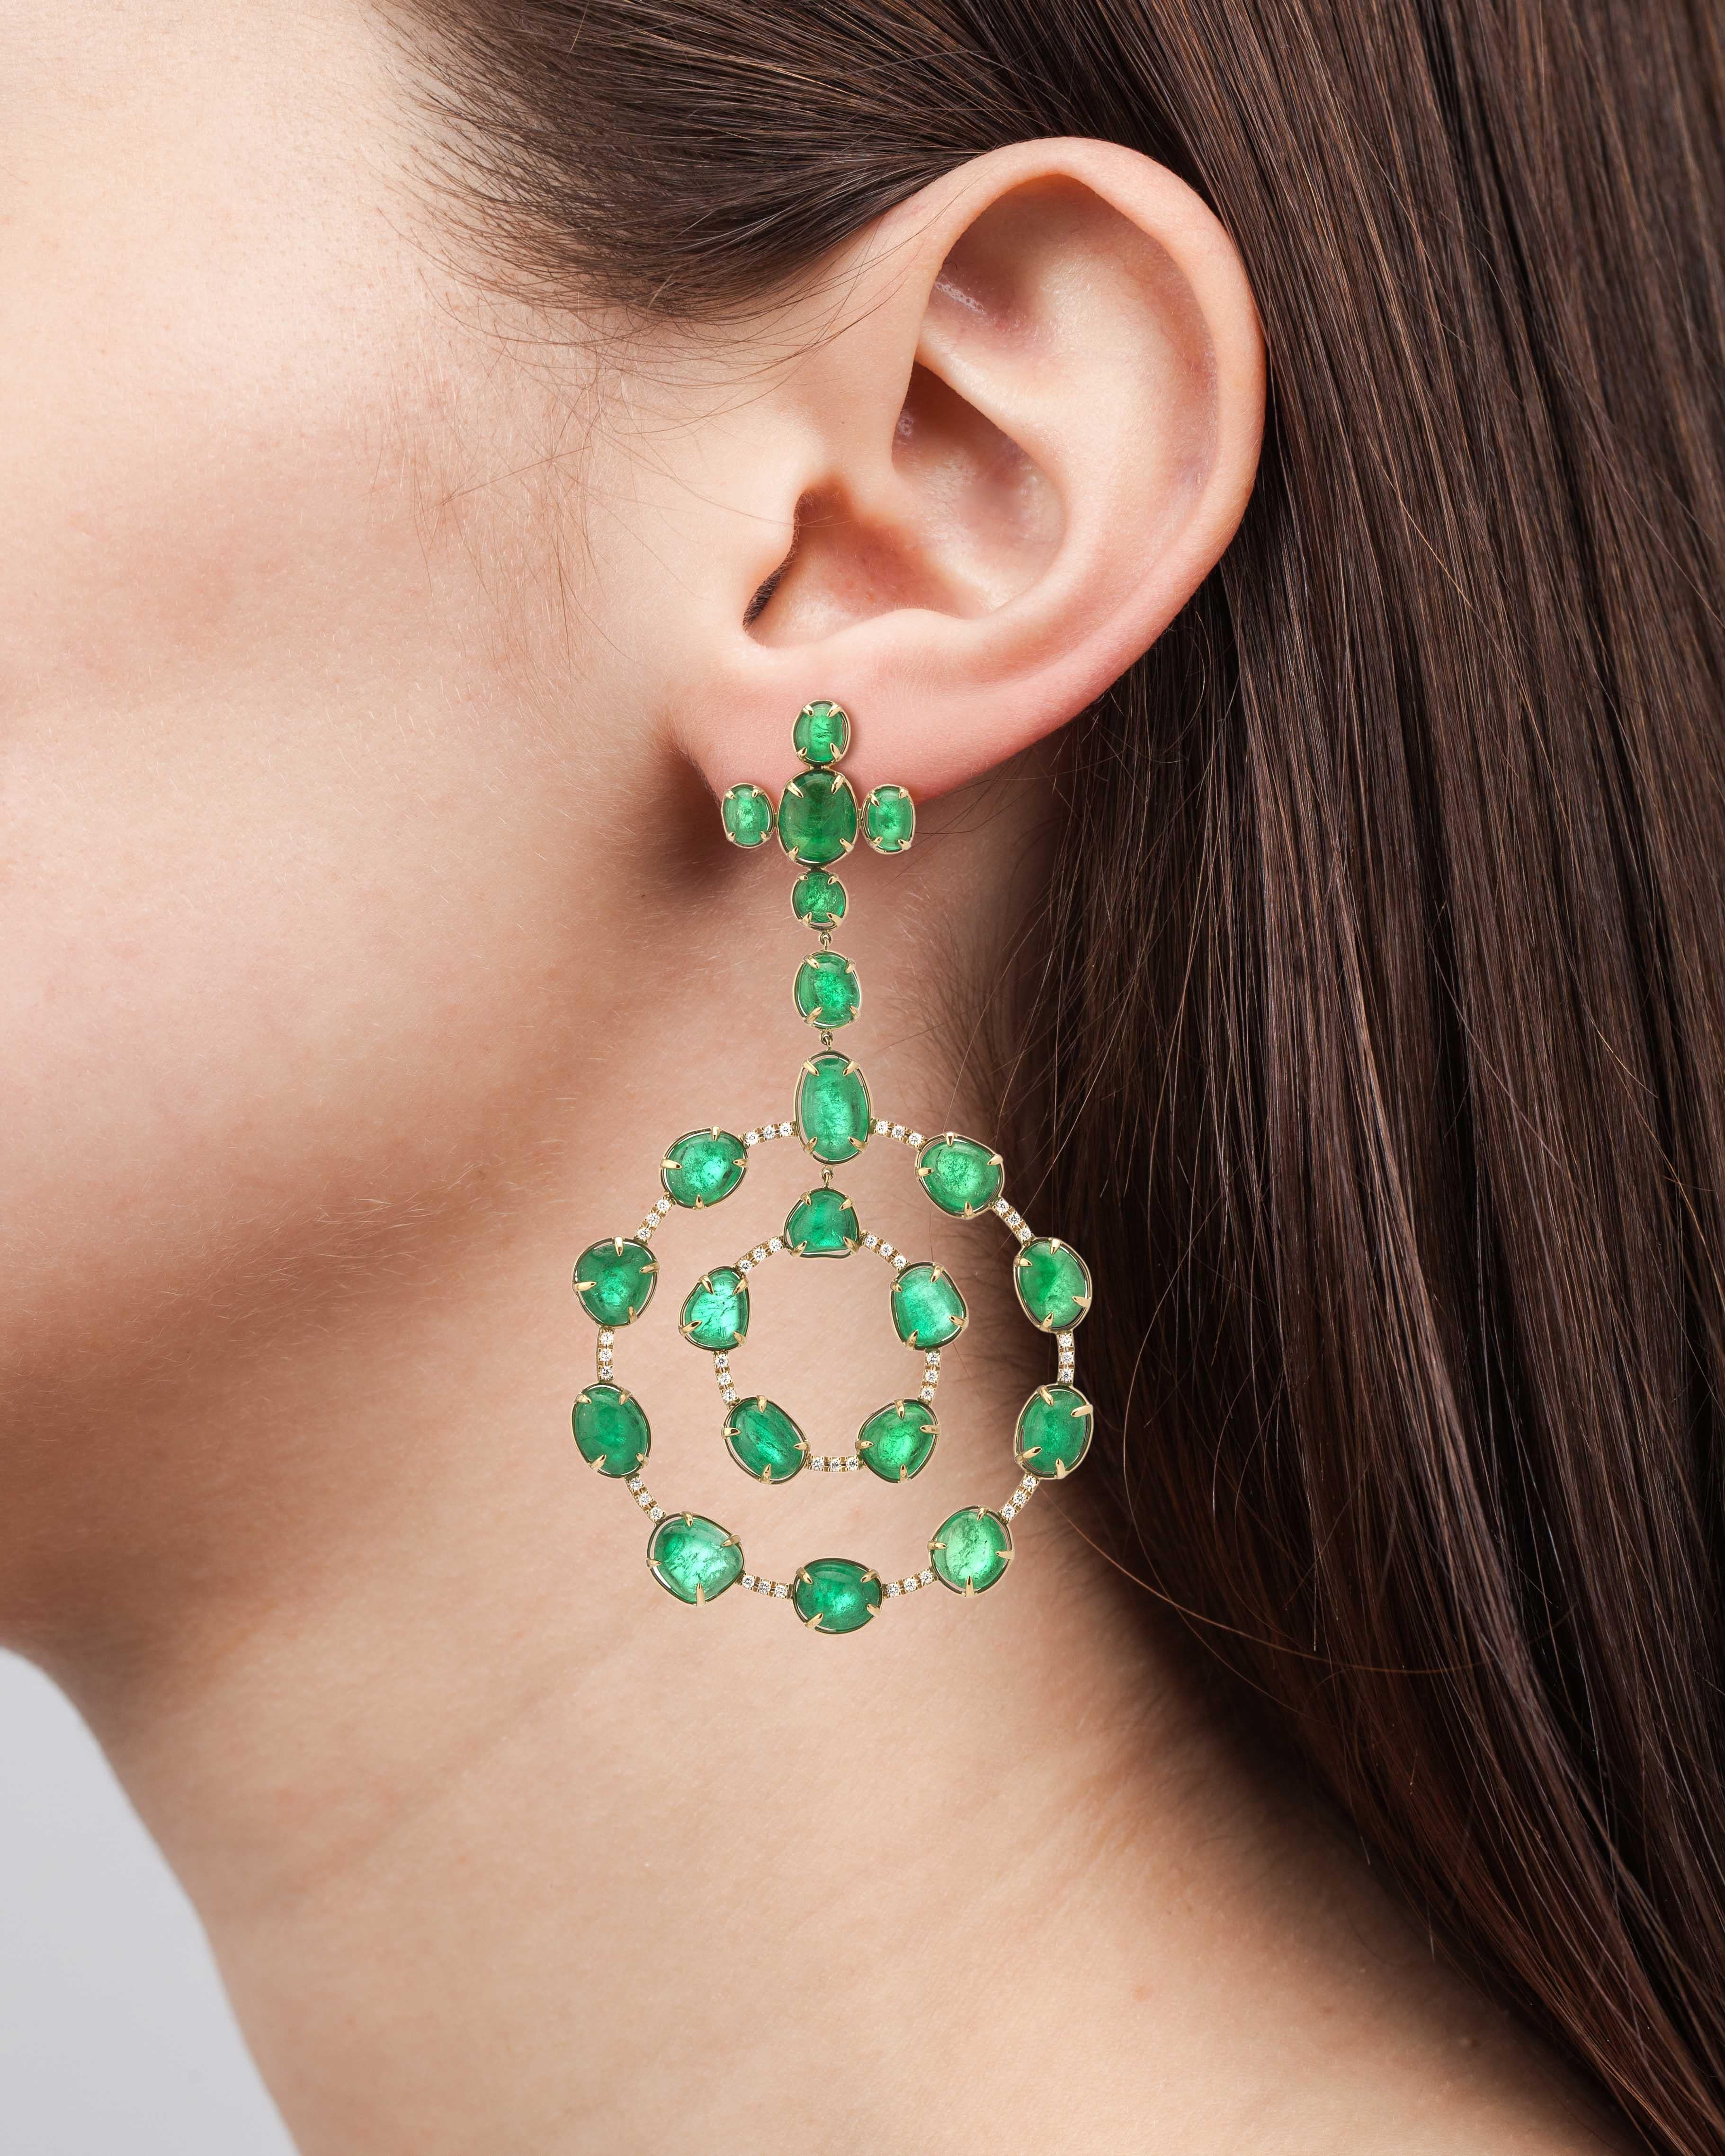 Contemporary statement earrings set in 18 Karat yellow gold with 82.37 carats of Muzo Colombian emeralds and 0.90 carats of diamond pave.

Muzo Emerald Colombia Heritage Royal Orb Earrings set with 82.37 carats Emerald.

One of 3 artifacts from the